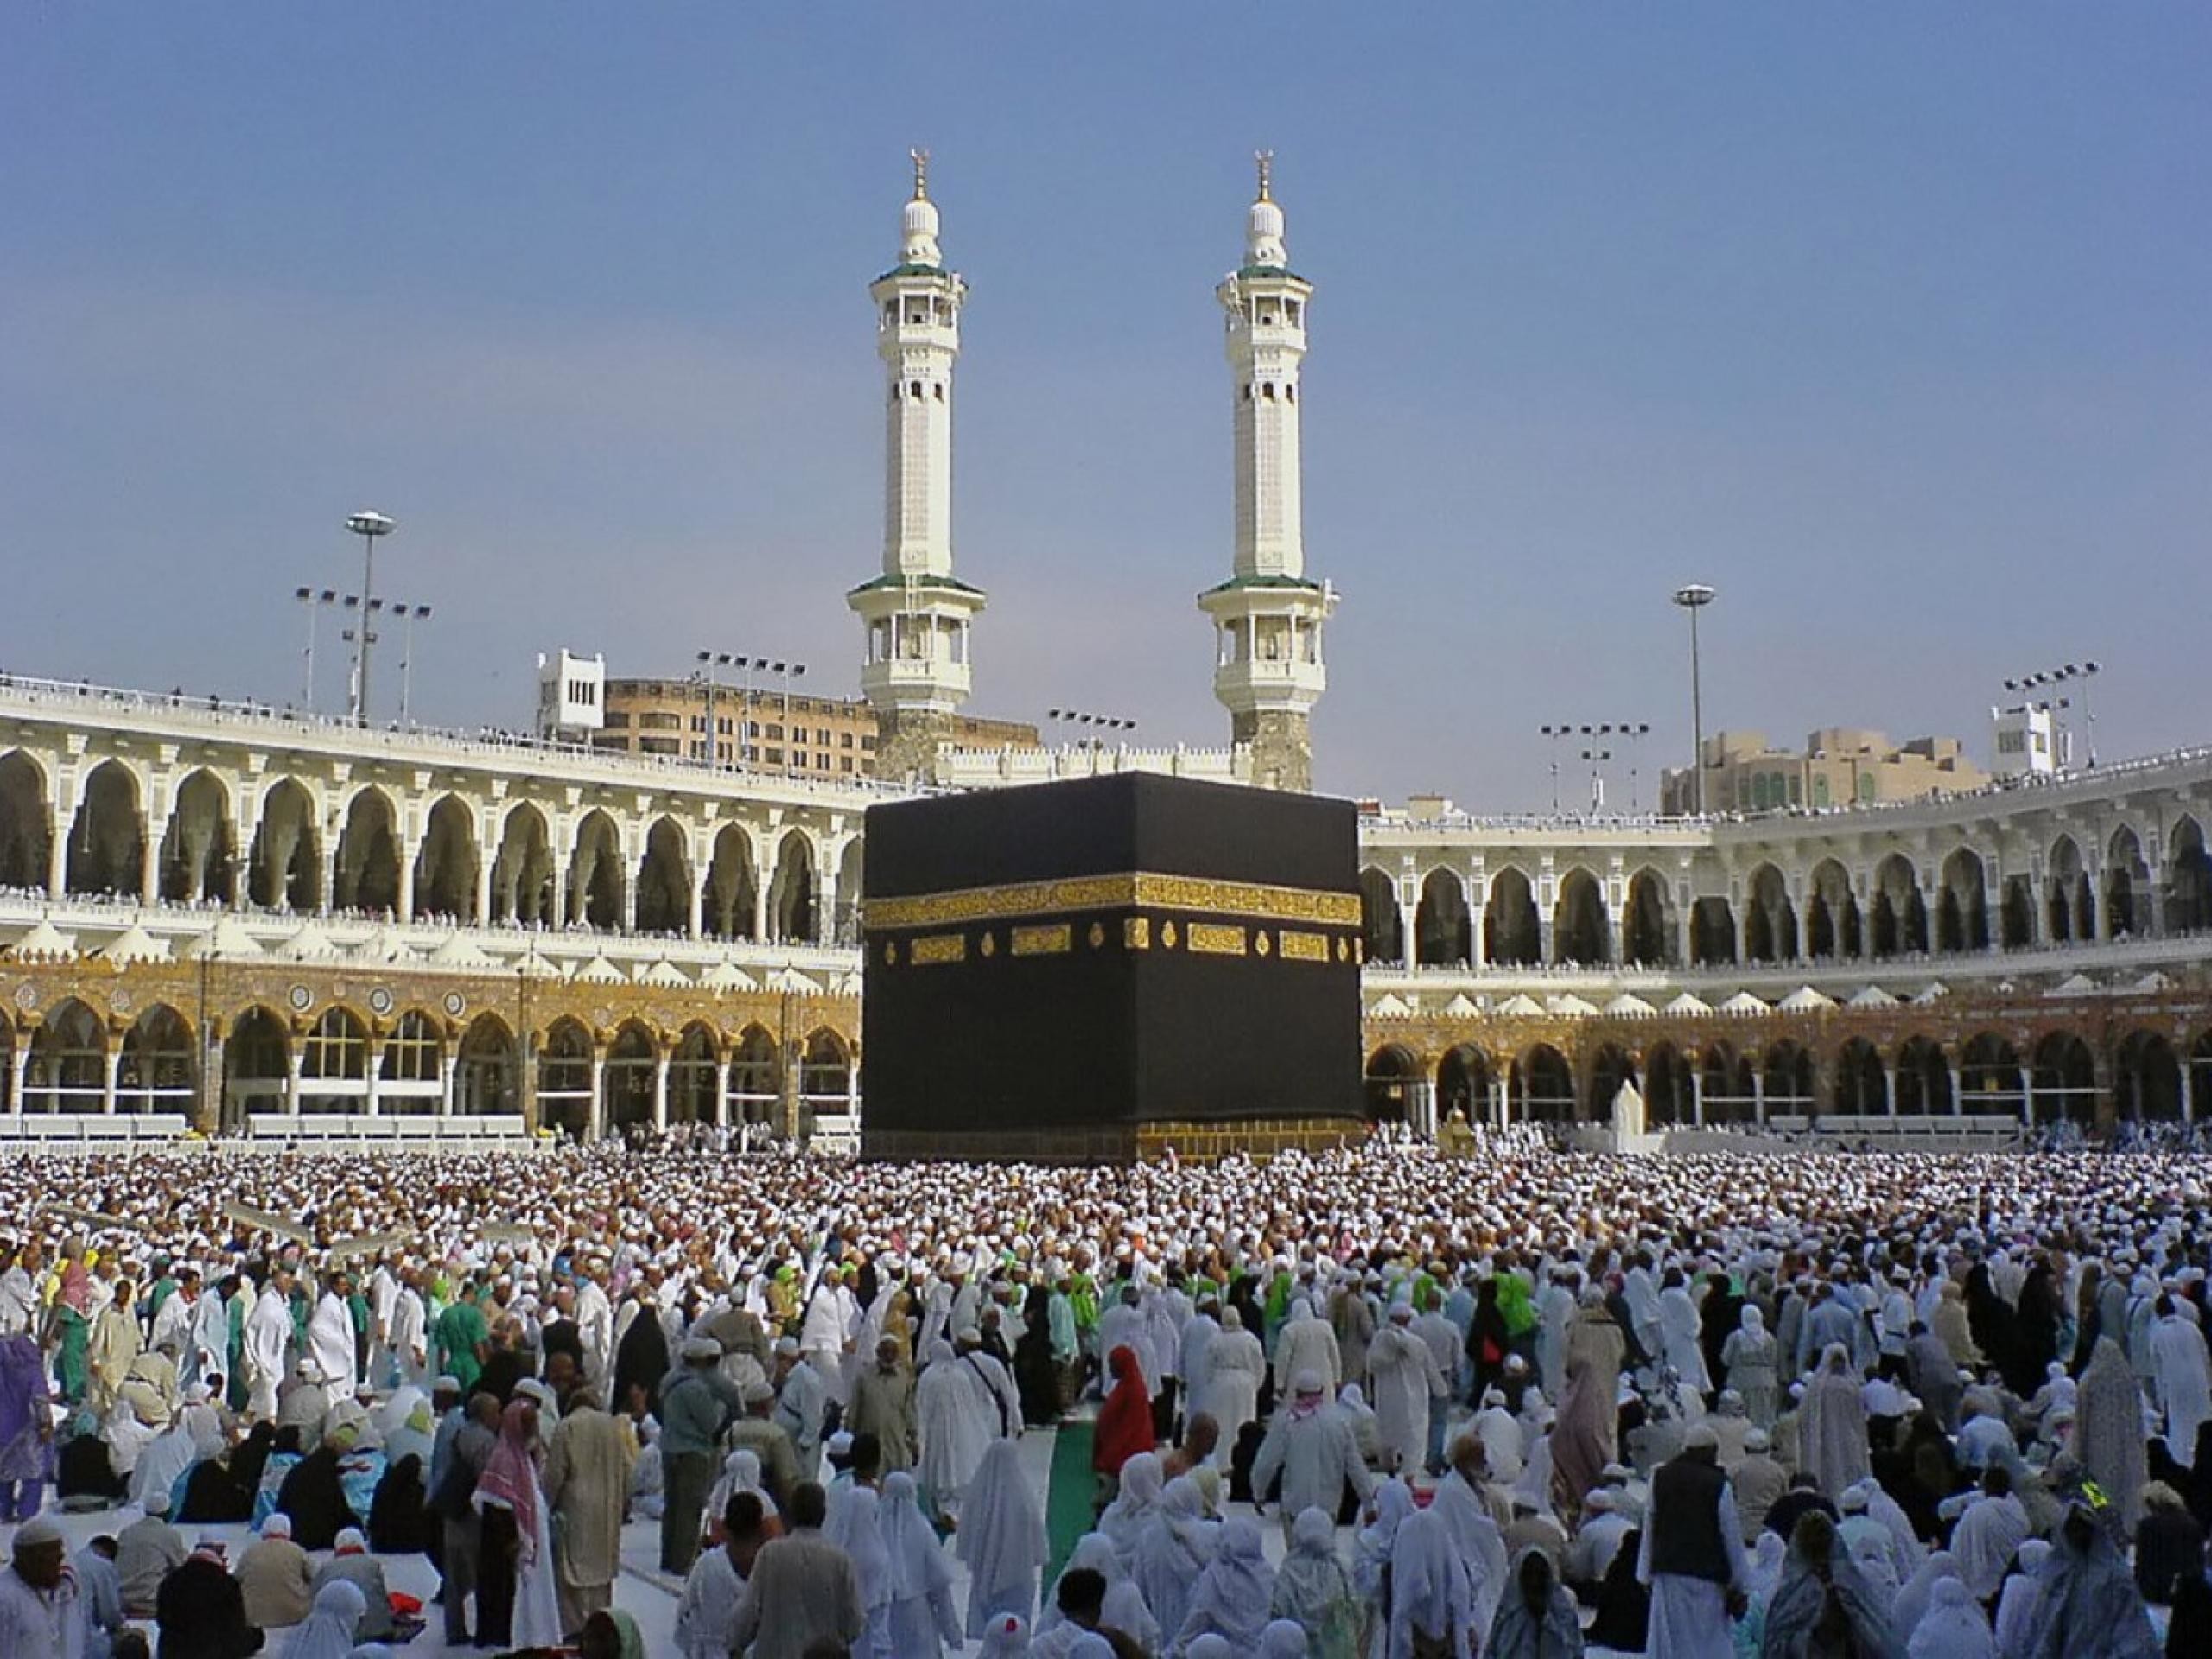 2560x1920 Download Free Mecca Kabba World City 525678 | HD Wallpapers .